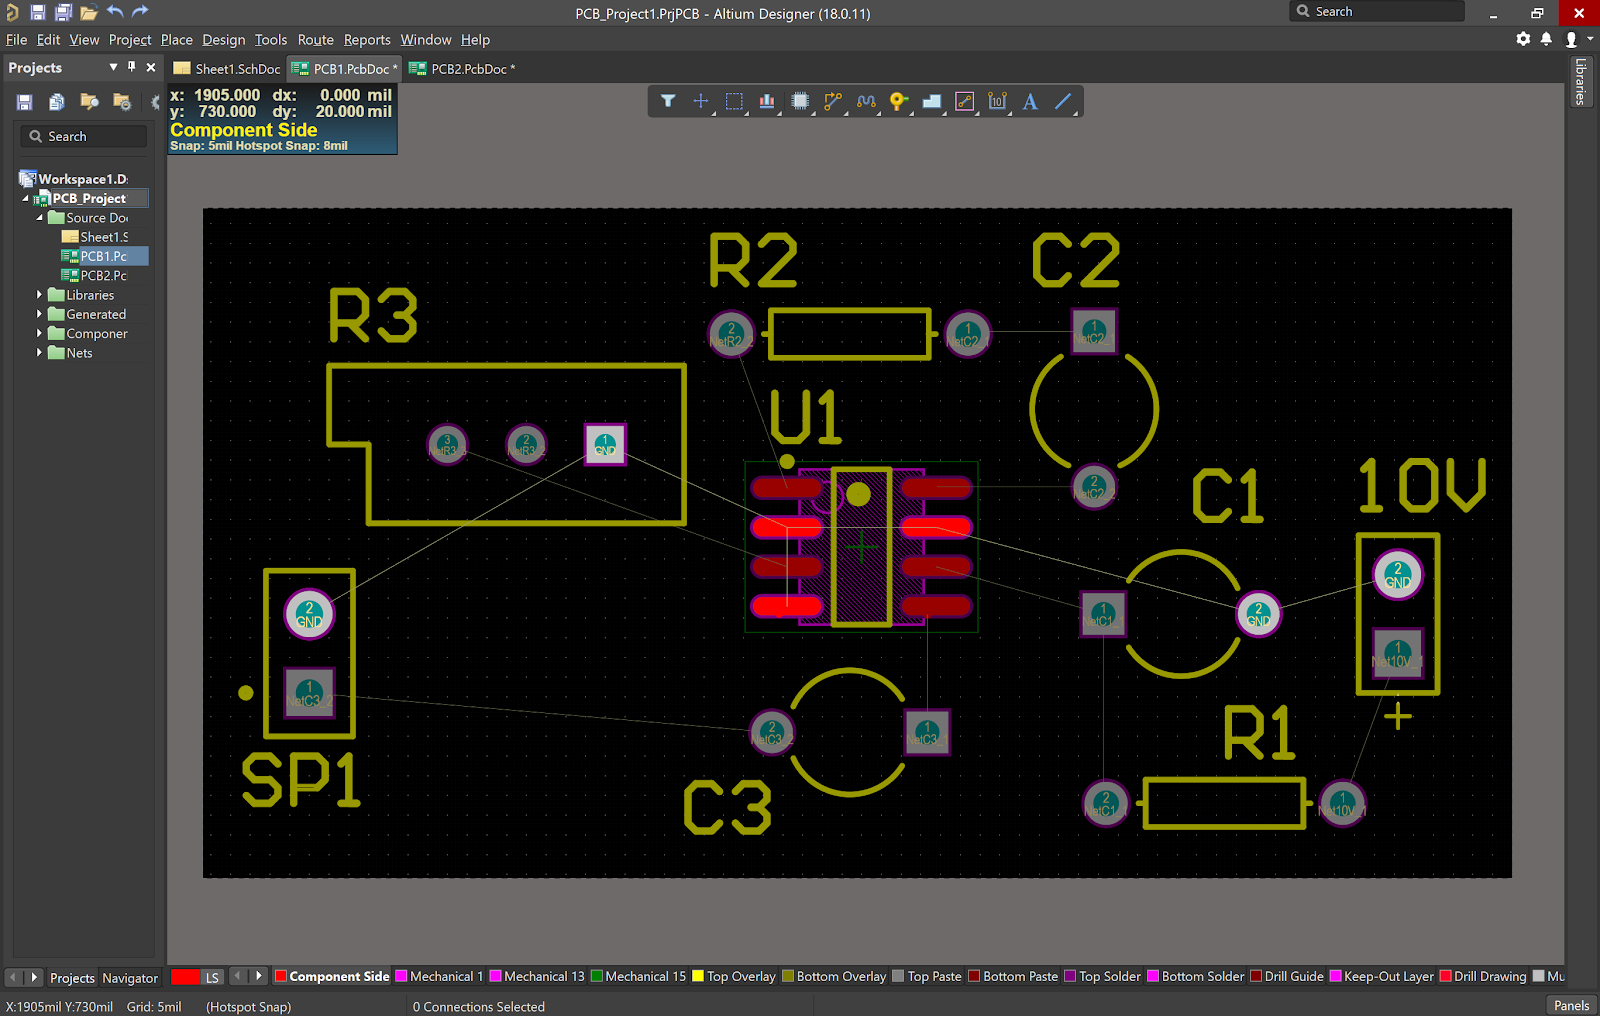 A PCB component arrangement for our LM358 op-amp circuit and PCB layout